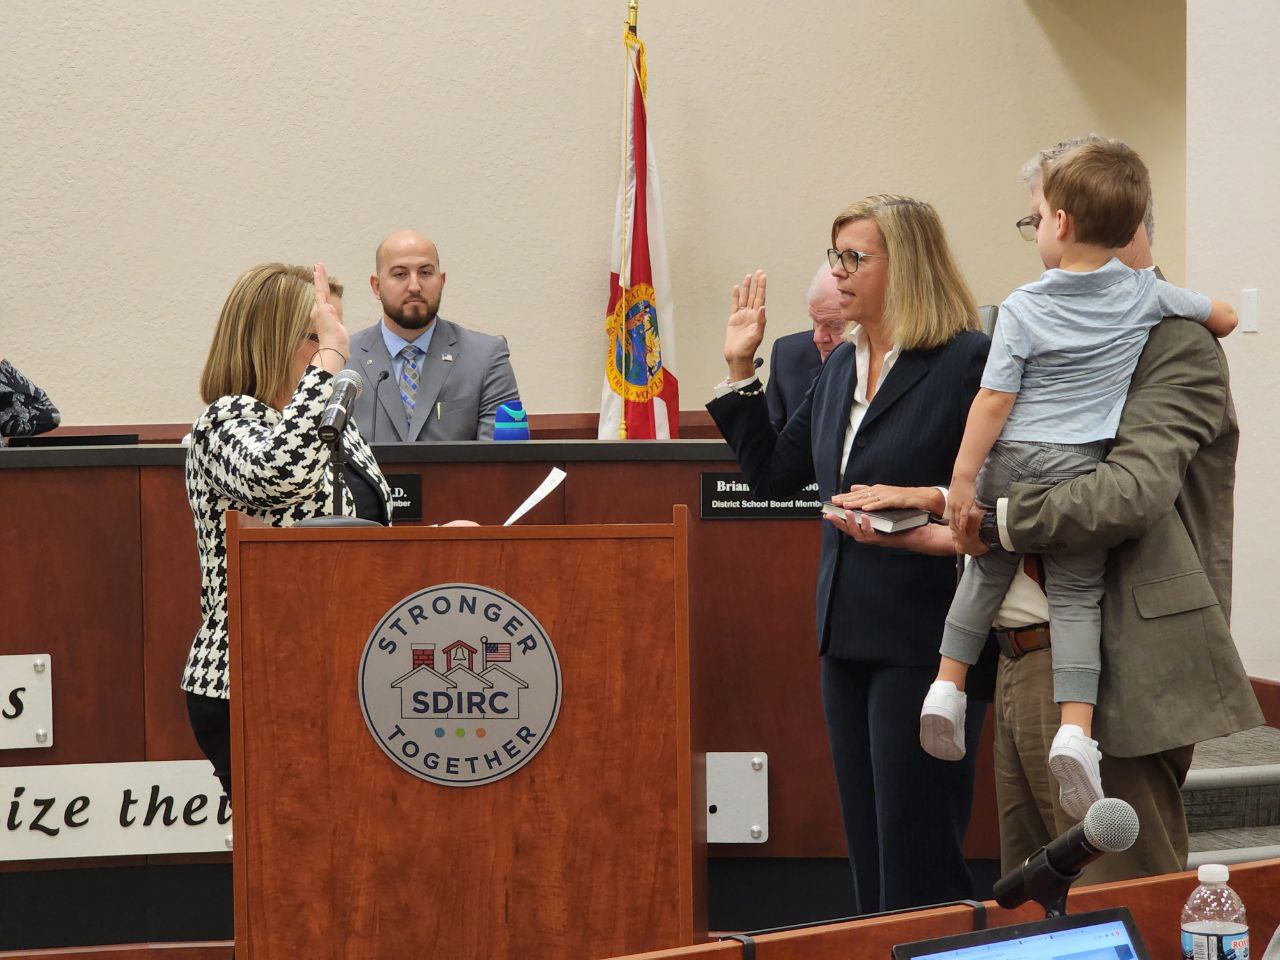 Judge Victoria Griffin administering oath of office to Teri Barenborg. Barenborg's husband Ed Barenborg is holding a bible in his right hand and is shown in the picture holding his Grandson